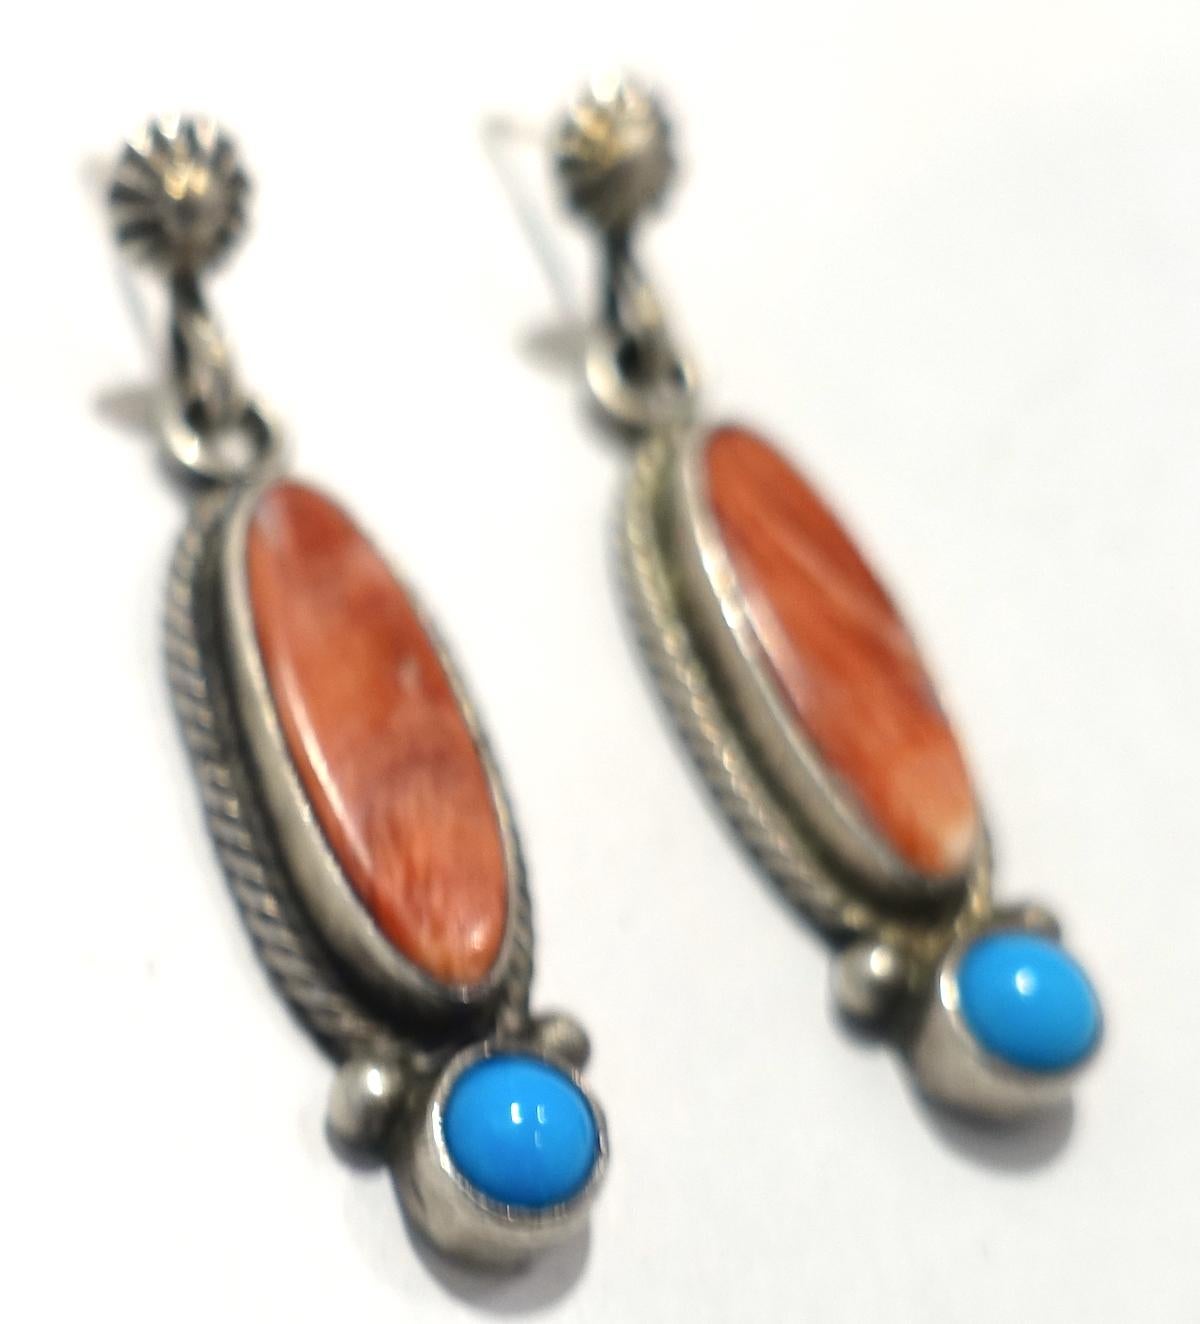 These vintage signed RB earrings has a coral color stone center encased in a sterling silver border.  A turquoise cabochon stone is at the bottom. In excellent condition, these pierced earrings measure 1-1/2” x 3/8” and are signed “RB 925”.